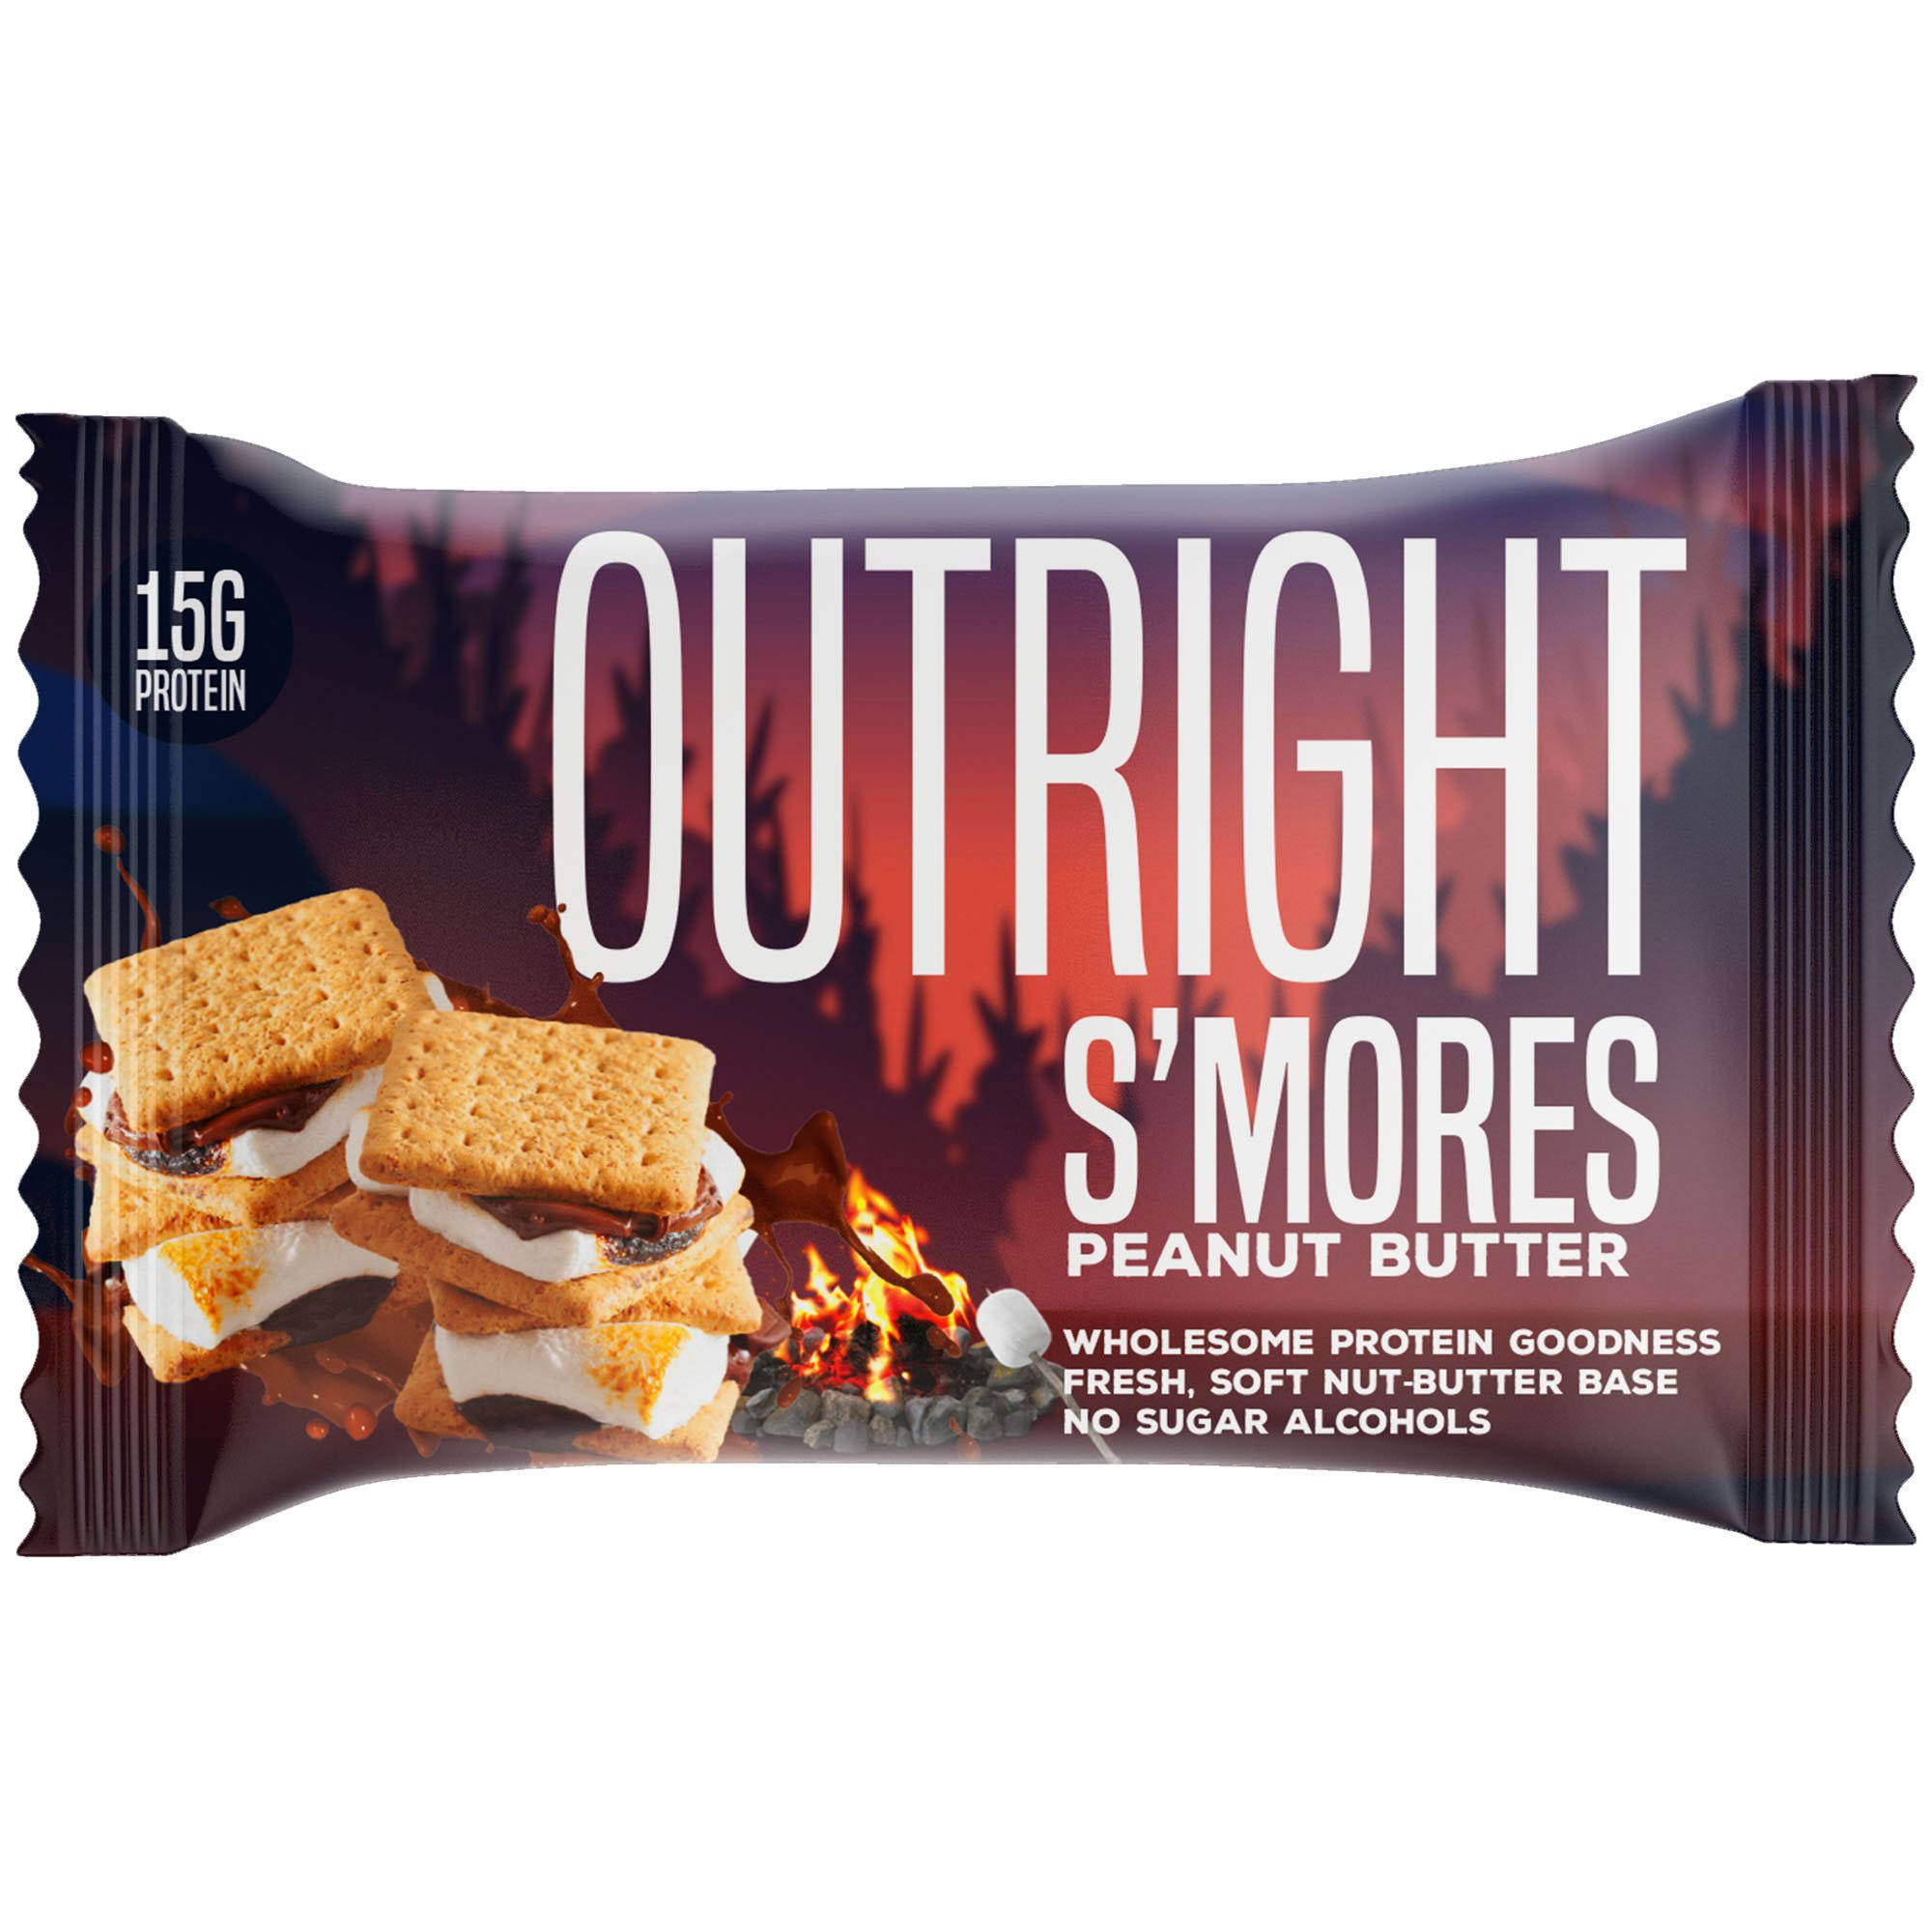 Outright Protein Bar, Peanut Butter, S’mores - 2.12 oz